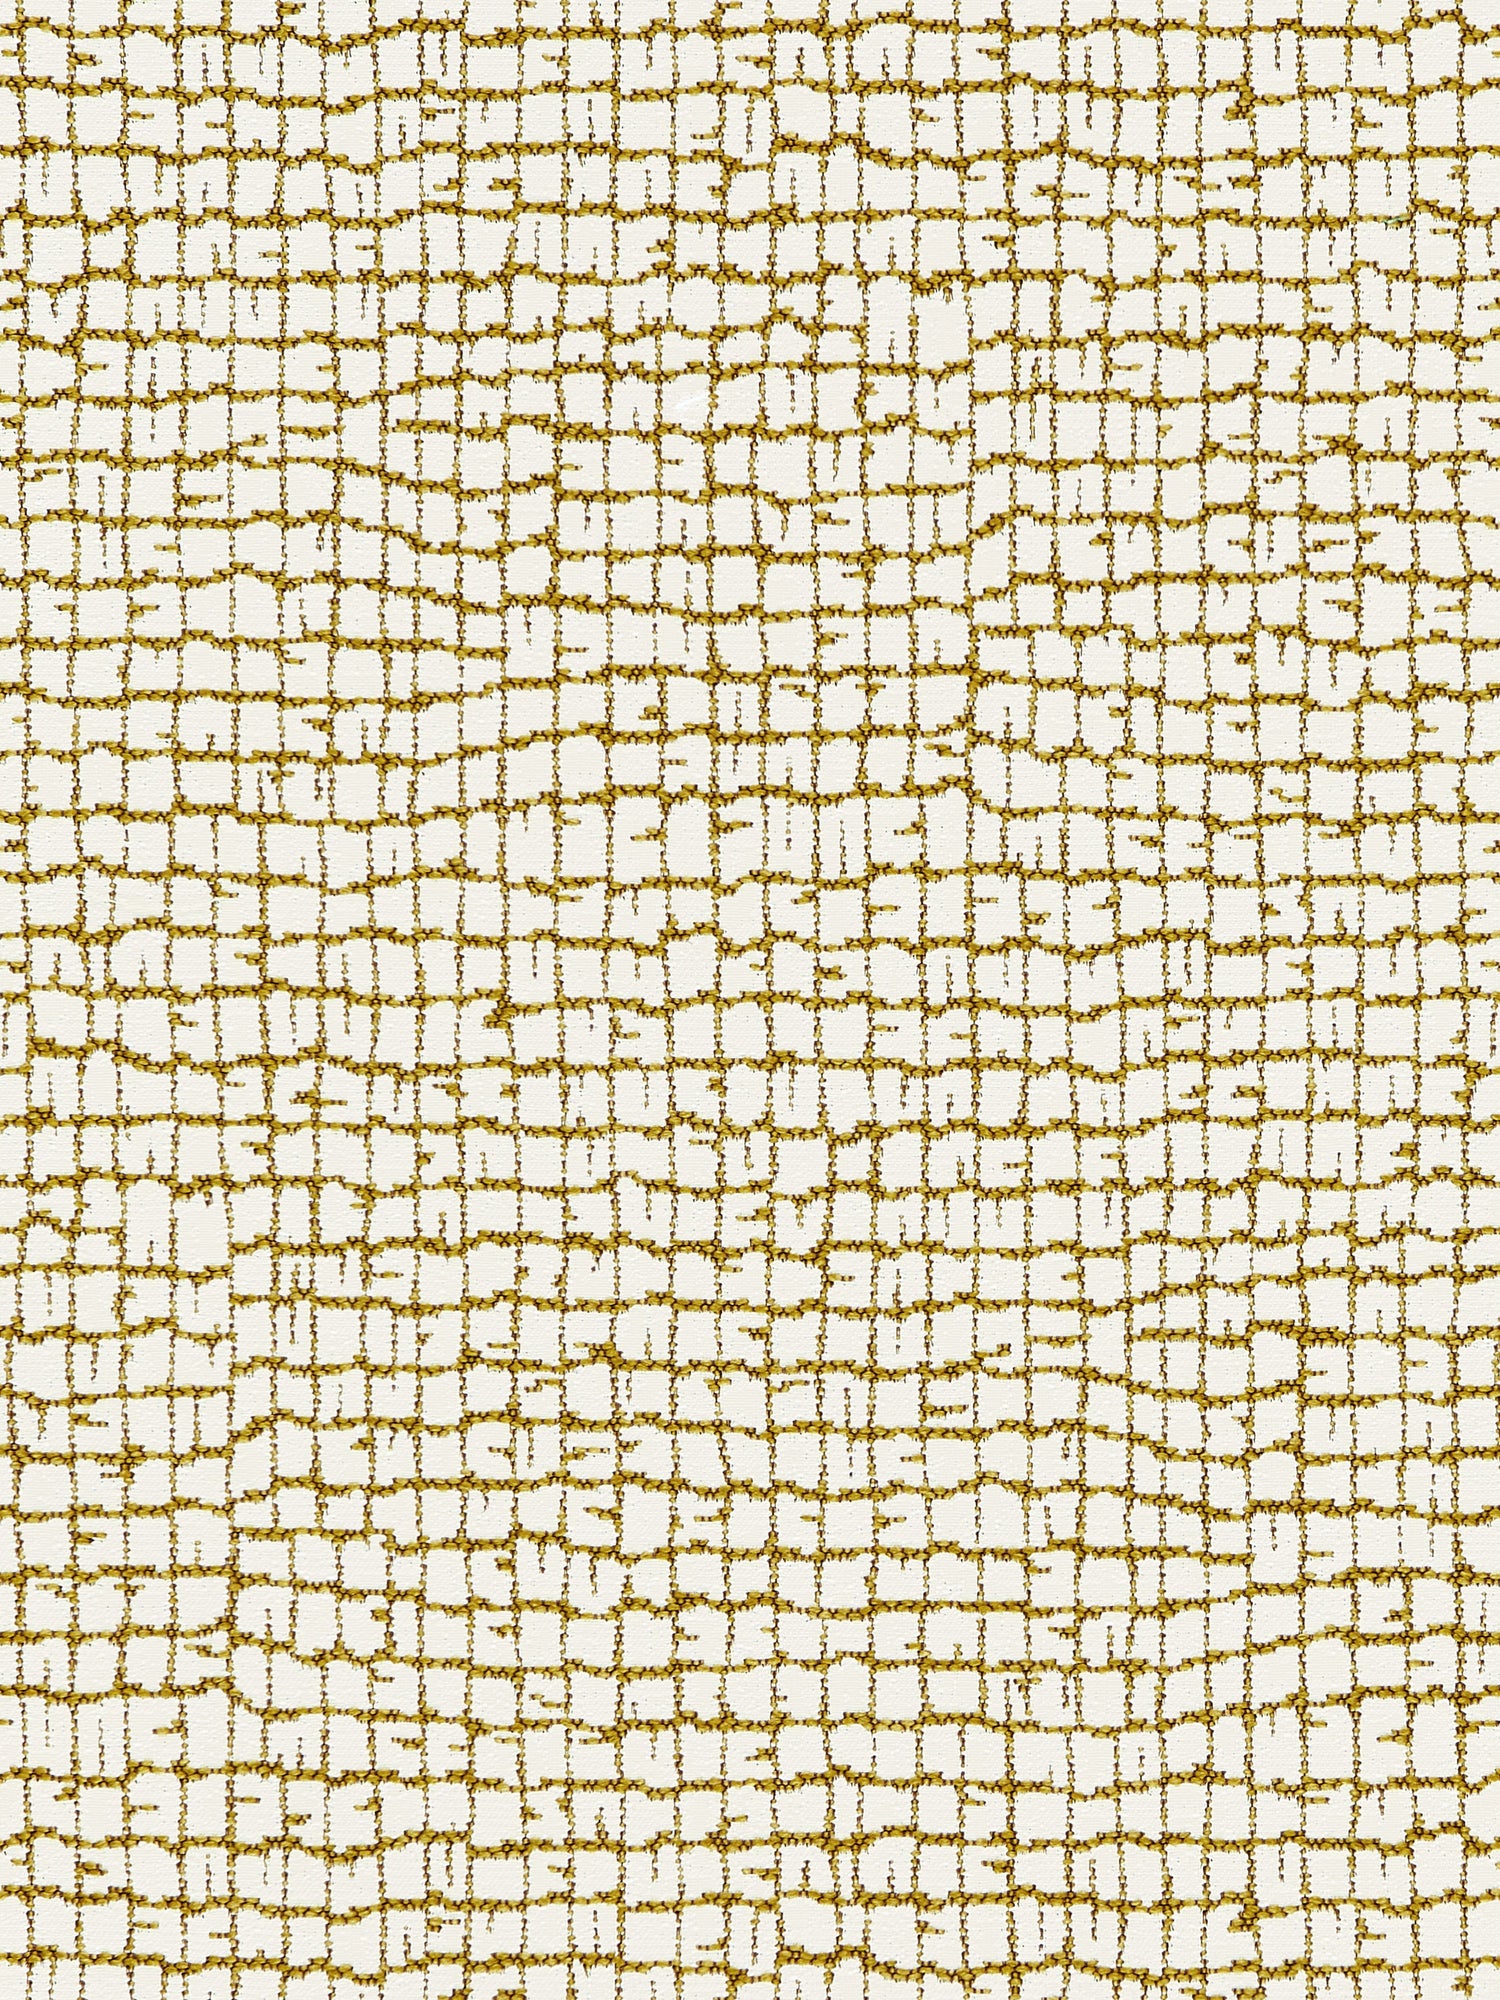 Troya Beach fabric in gold color - pattern number PO 0003TROY - by Scalamandre in the Old World Weavers collection